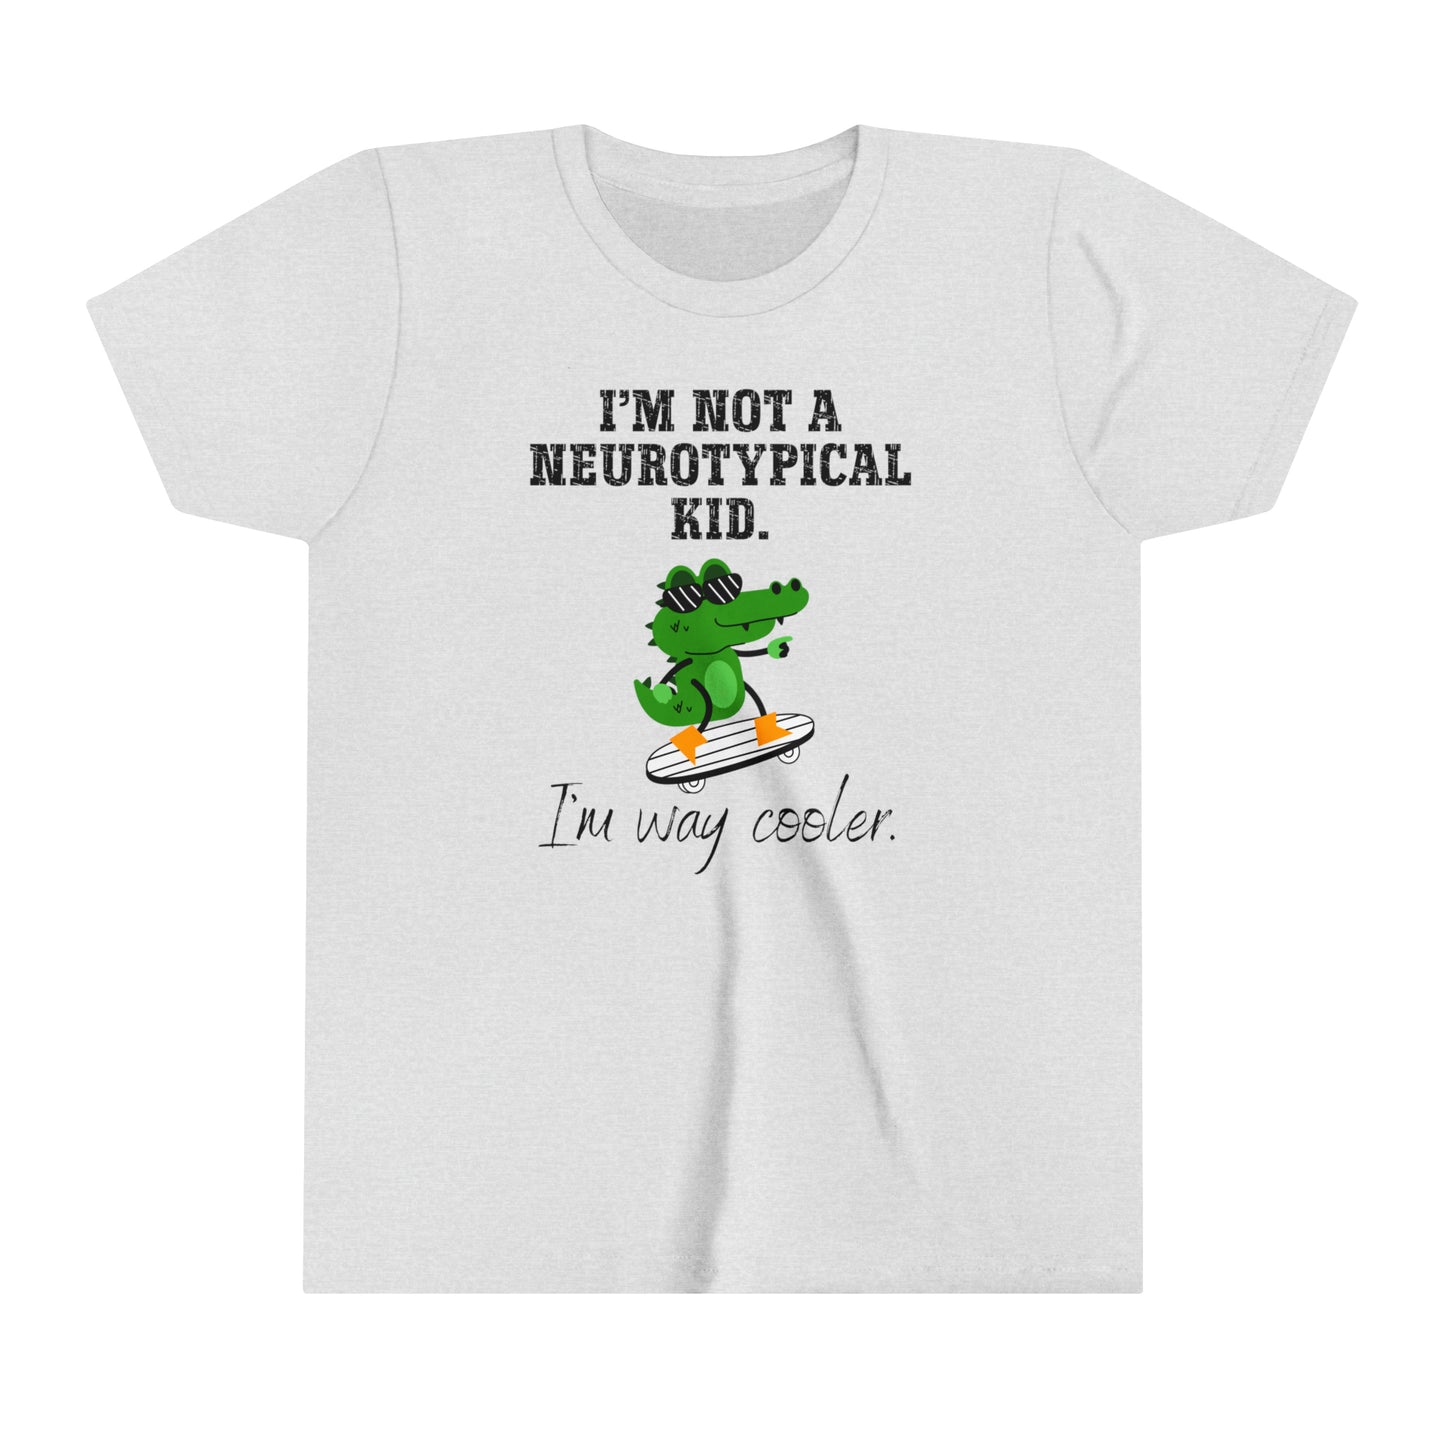 Not A Nuerotypical Kid, I'm Way Cooler Autism Advocate Youth Shirt